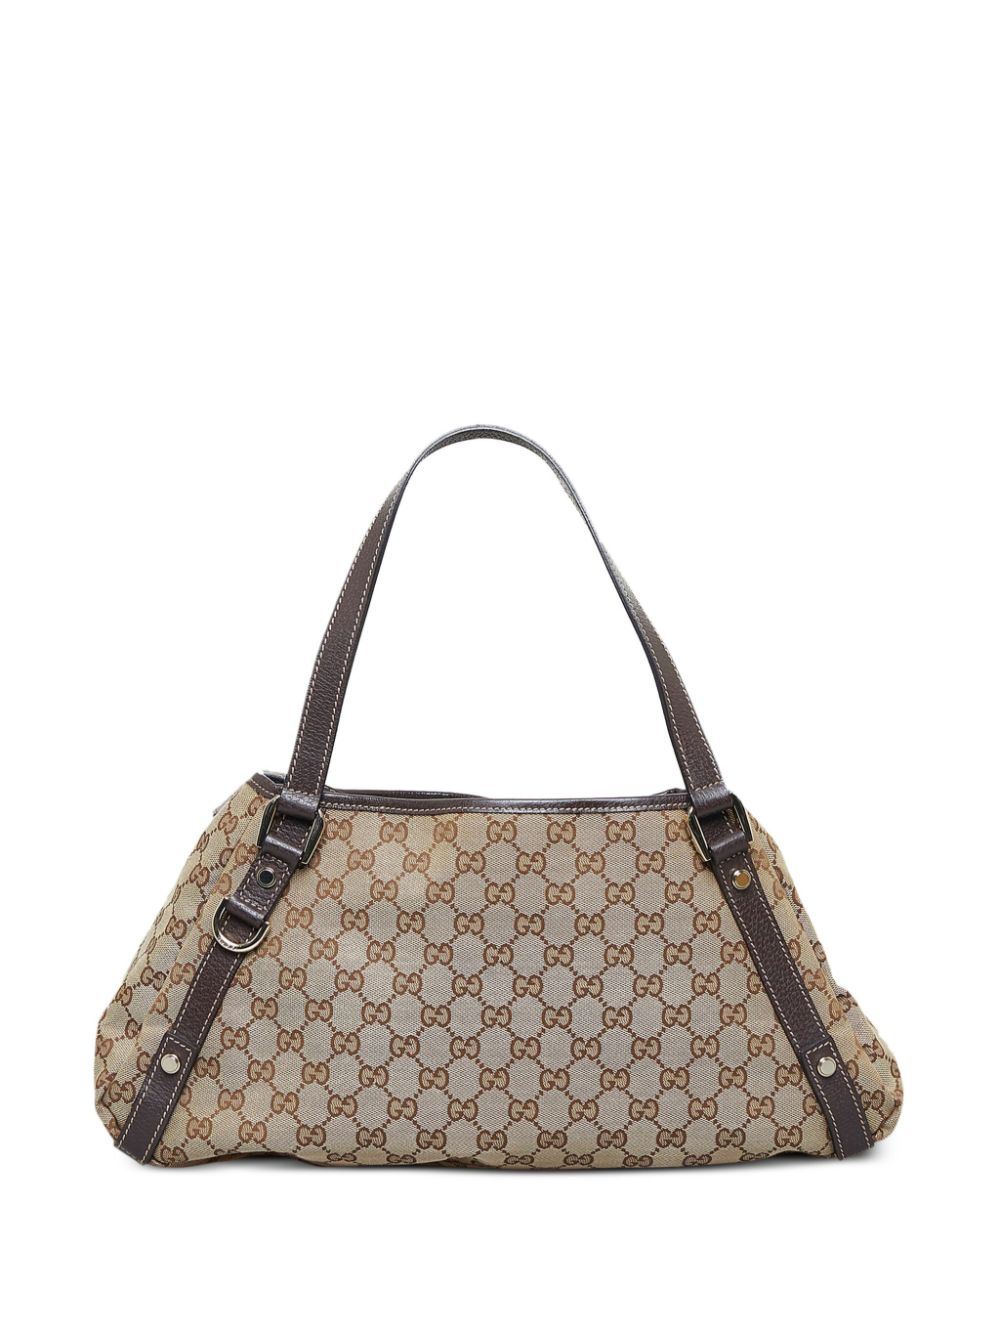 Gucci Pre-Owned GG Canvas Abbey shoulder bag - Beige